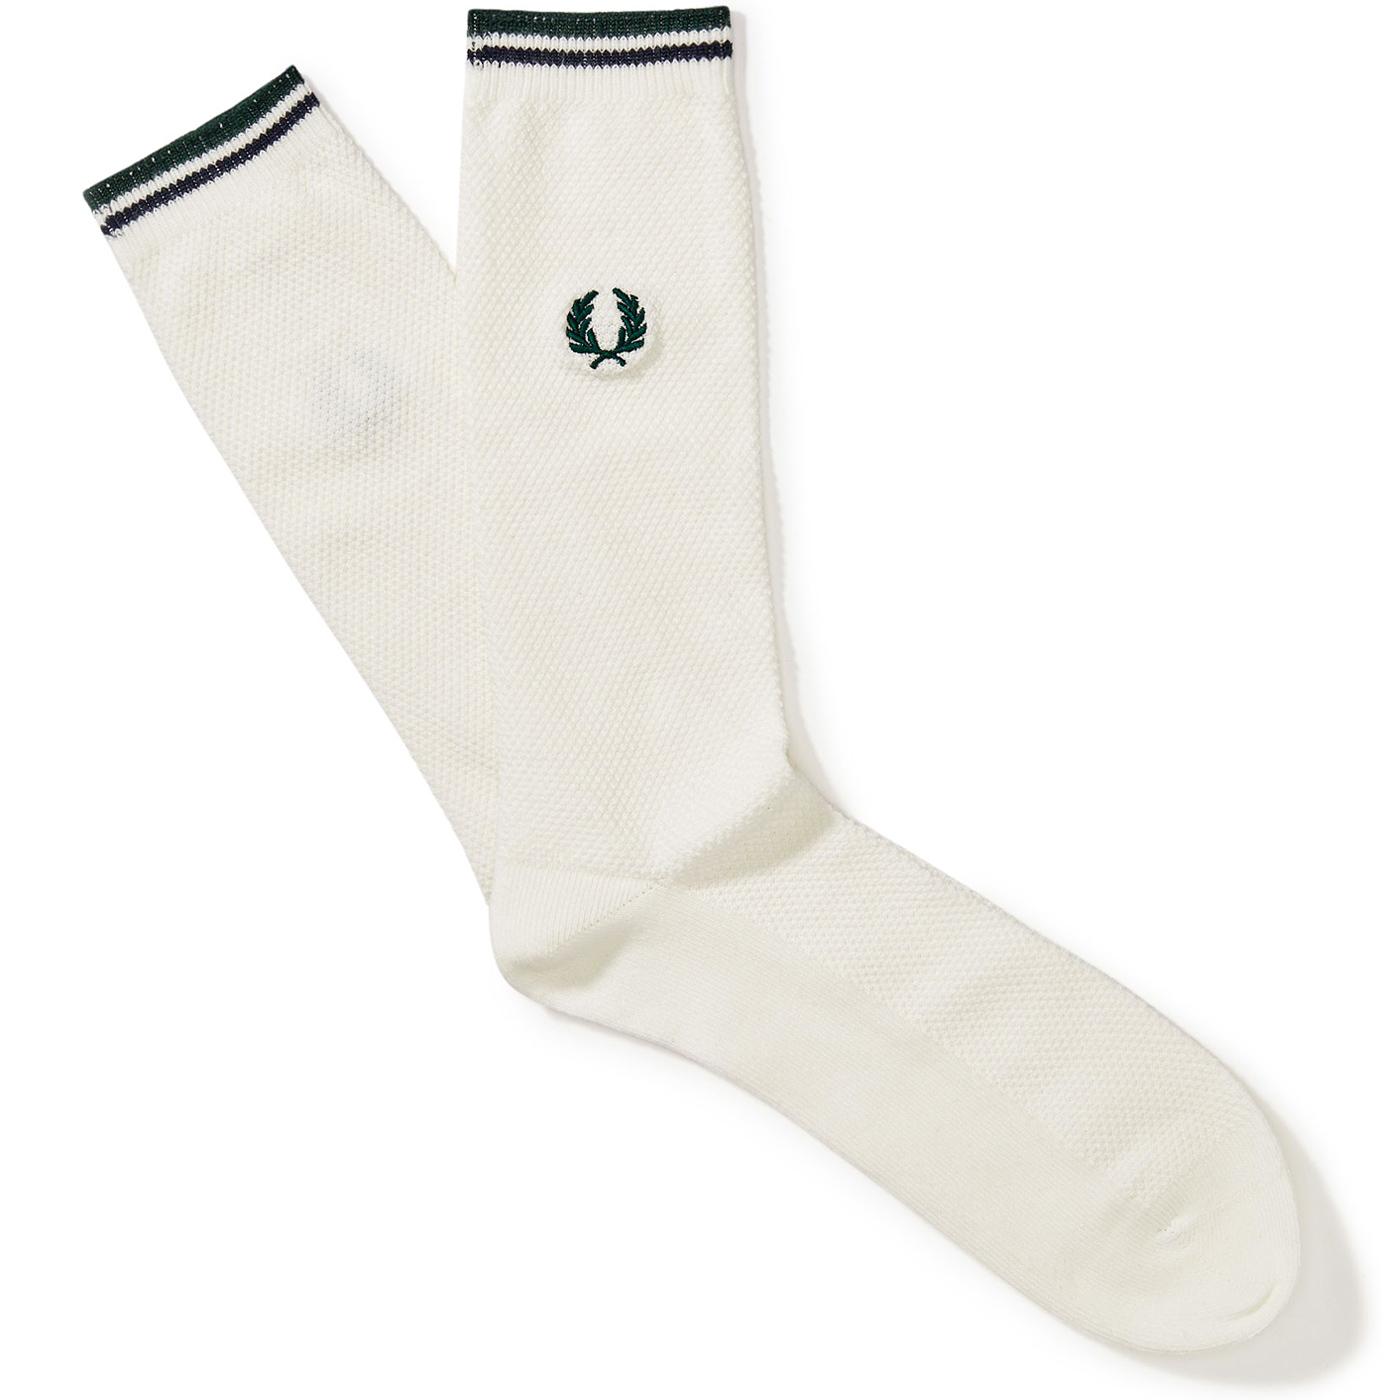 + FRED PERRY Retro Tipped Socks (Snow White/Ivy)